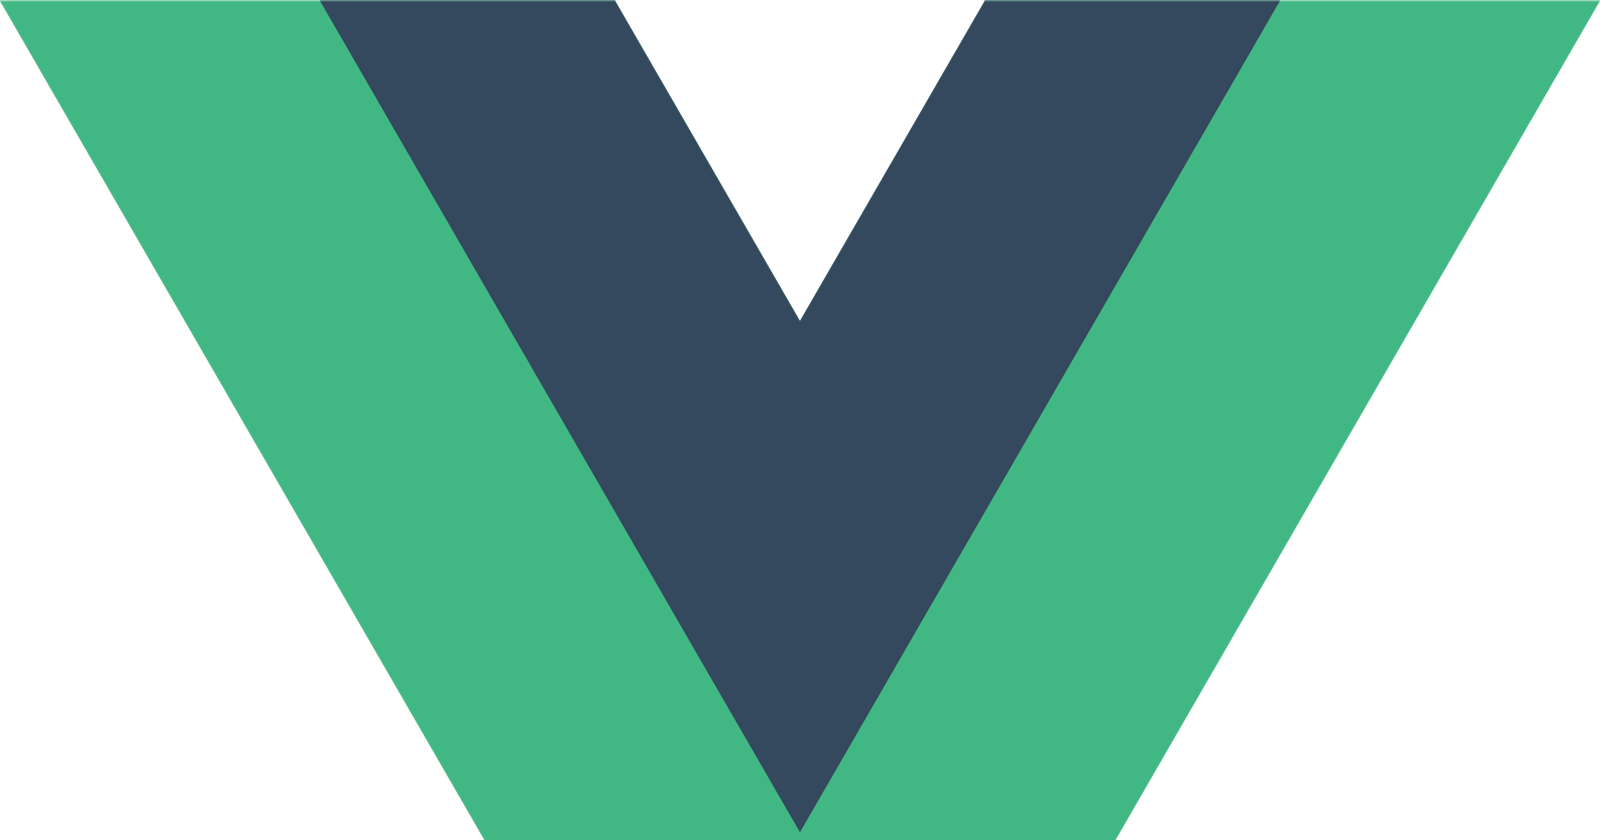 An Introduction to Vue